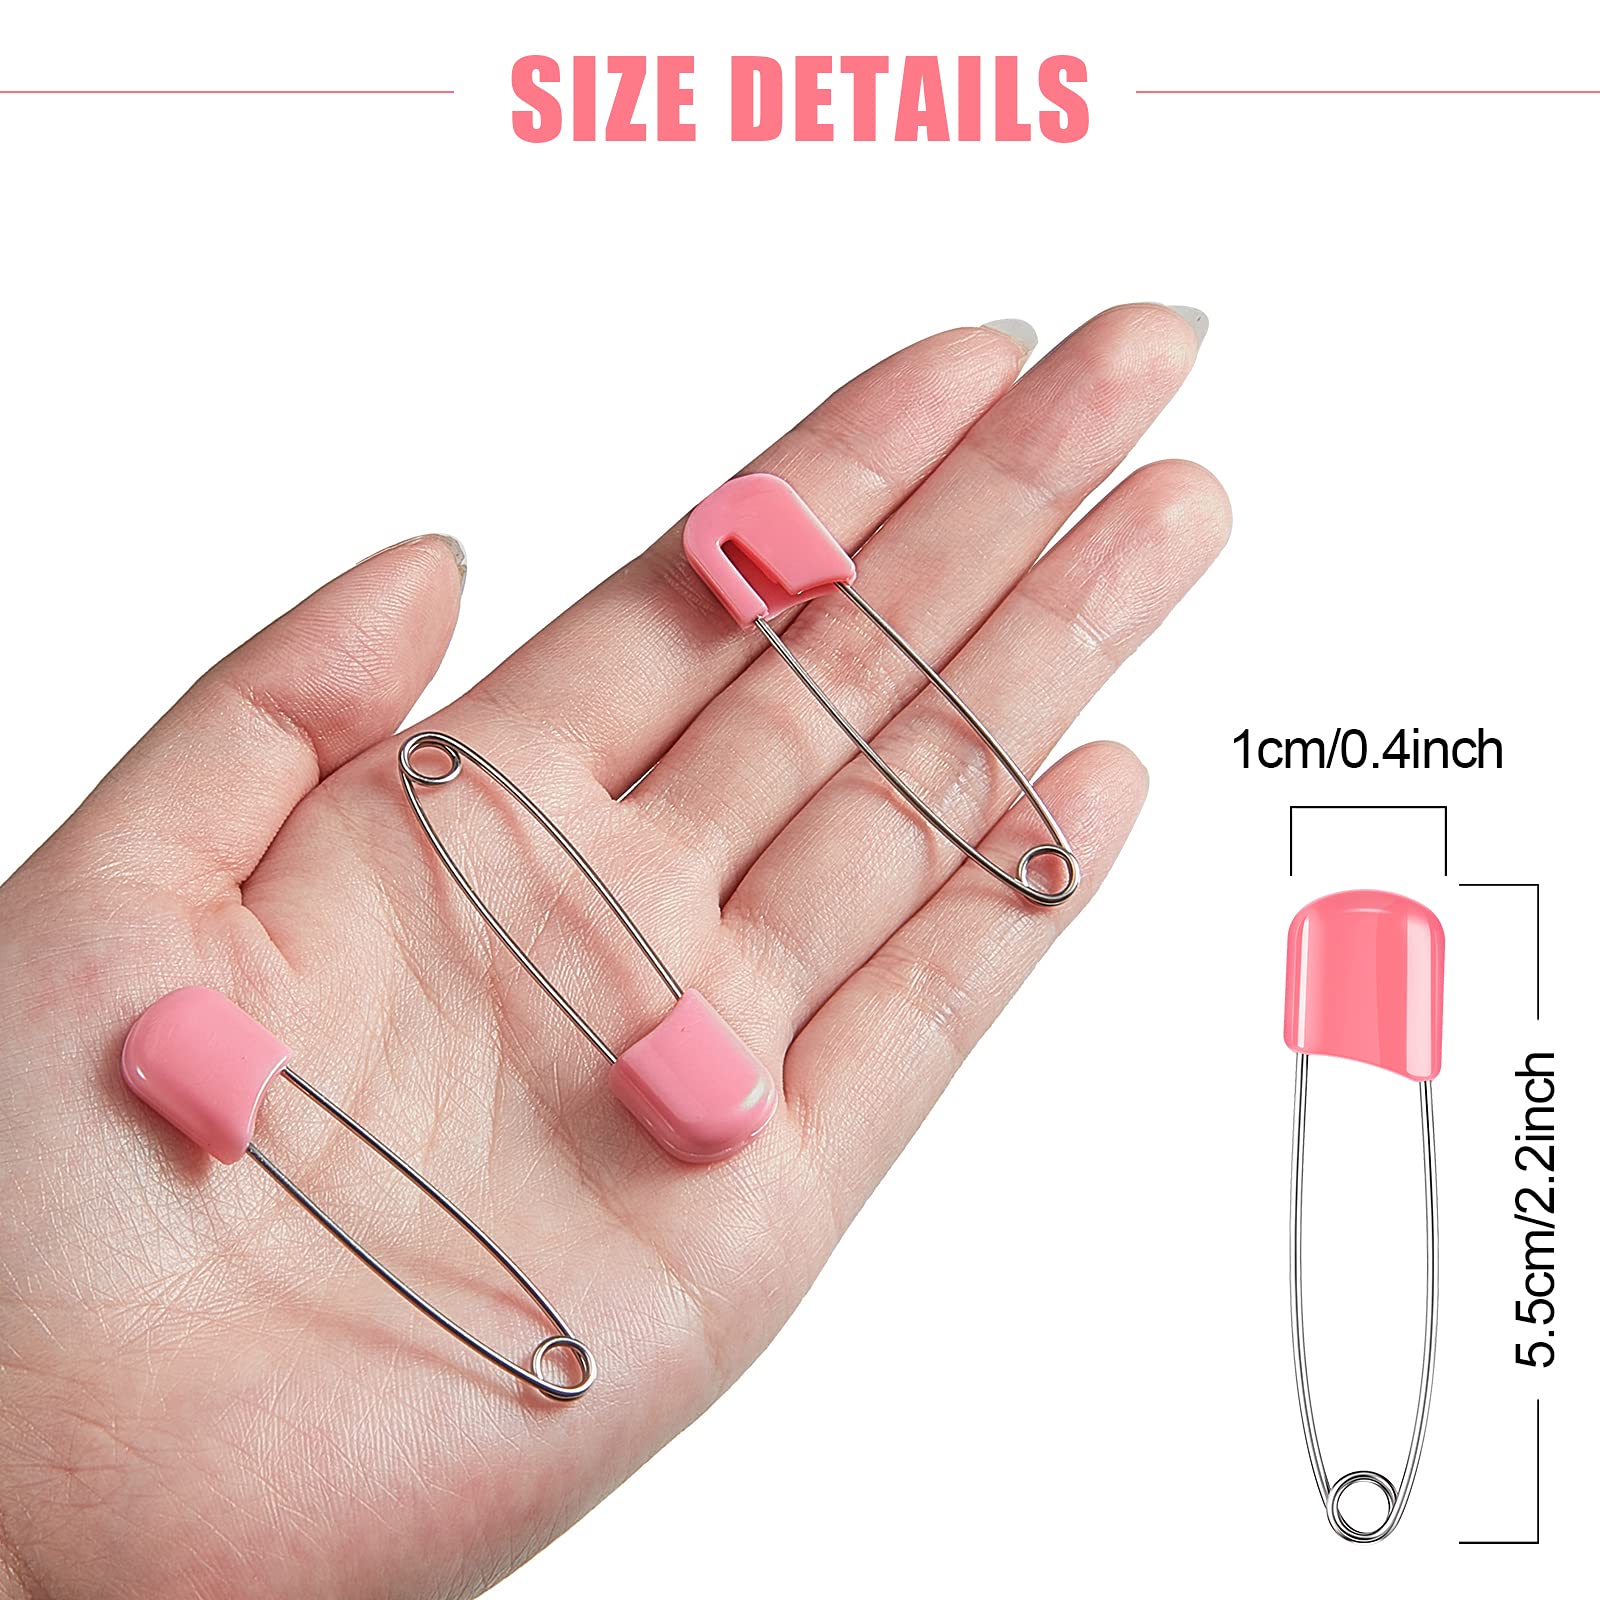 50 Pieces Diaper Pins Baby Safety Pins 2.2 Inch Plastic Head Cloth Diaper Pins with Locking Closures Stainless Steel Nappy Pins with Velvet Bag (Pink)